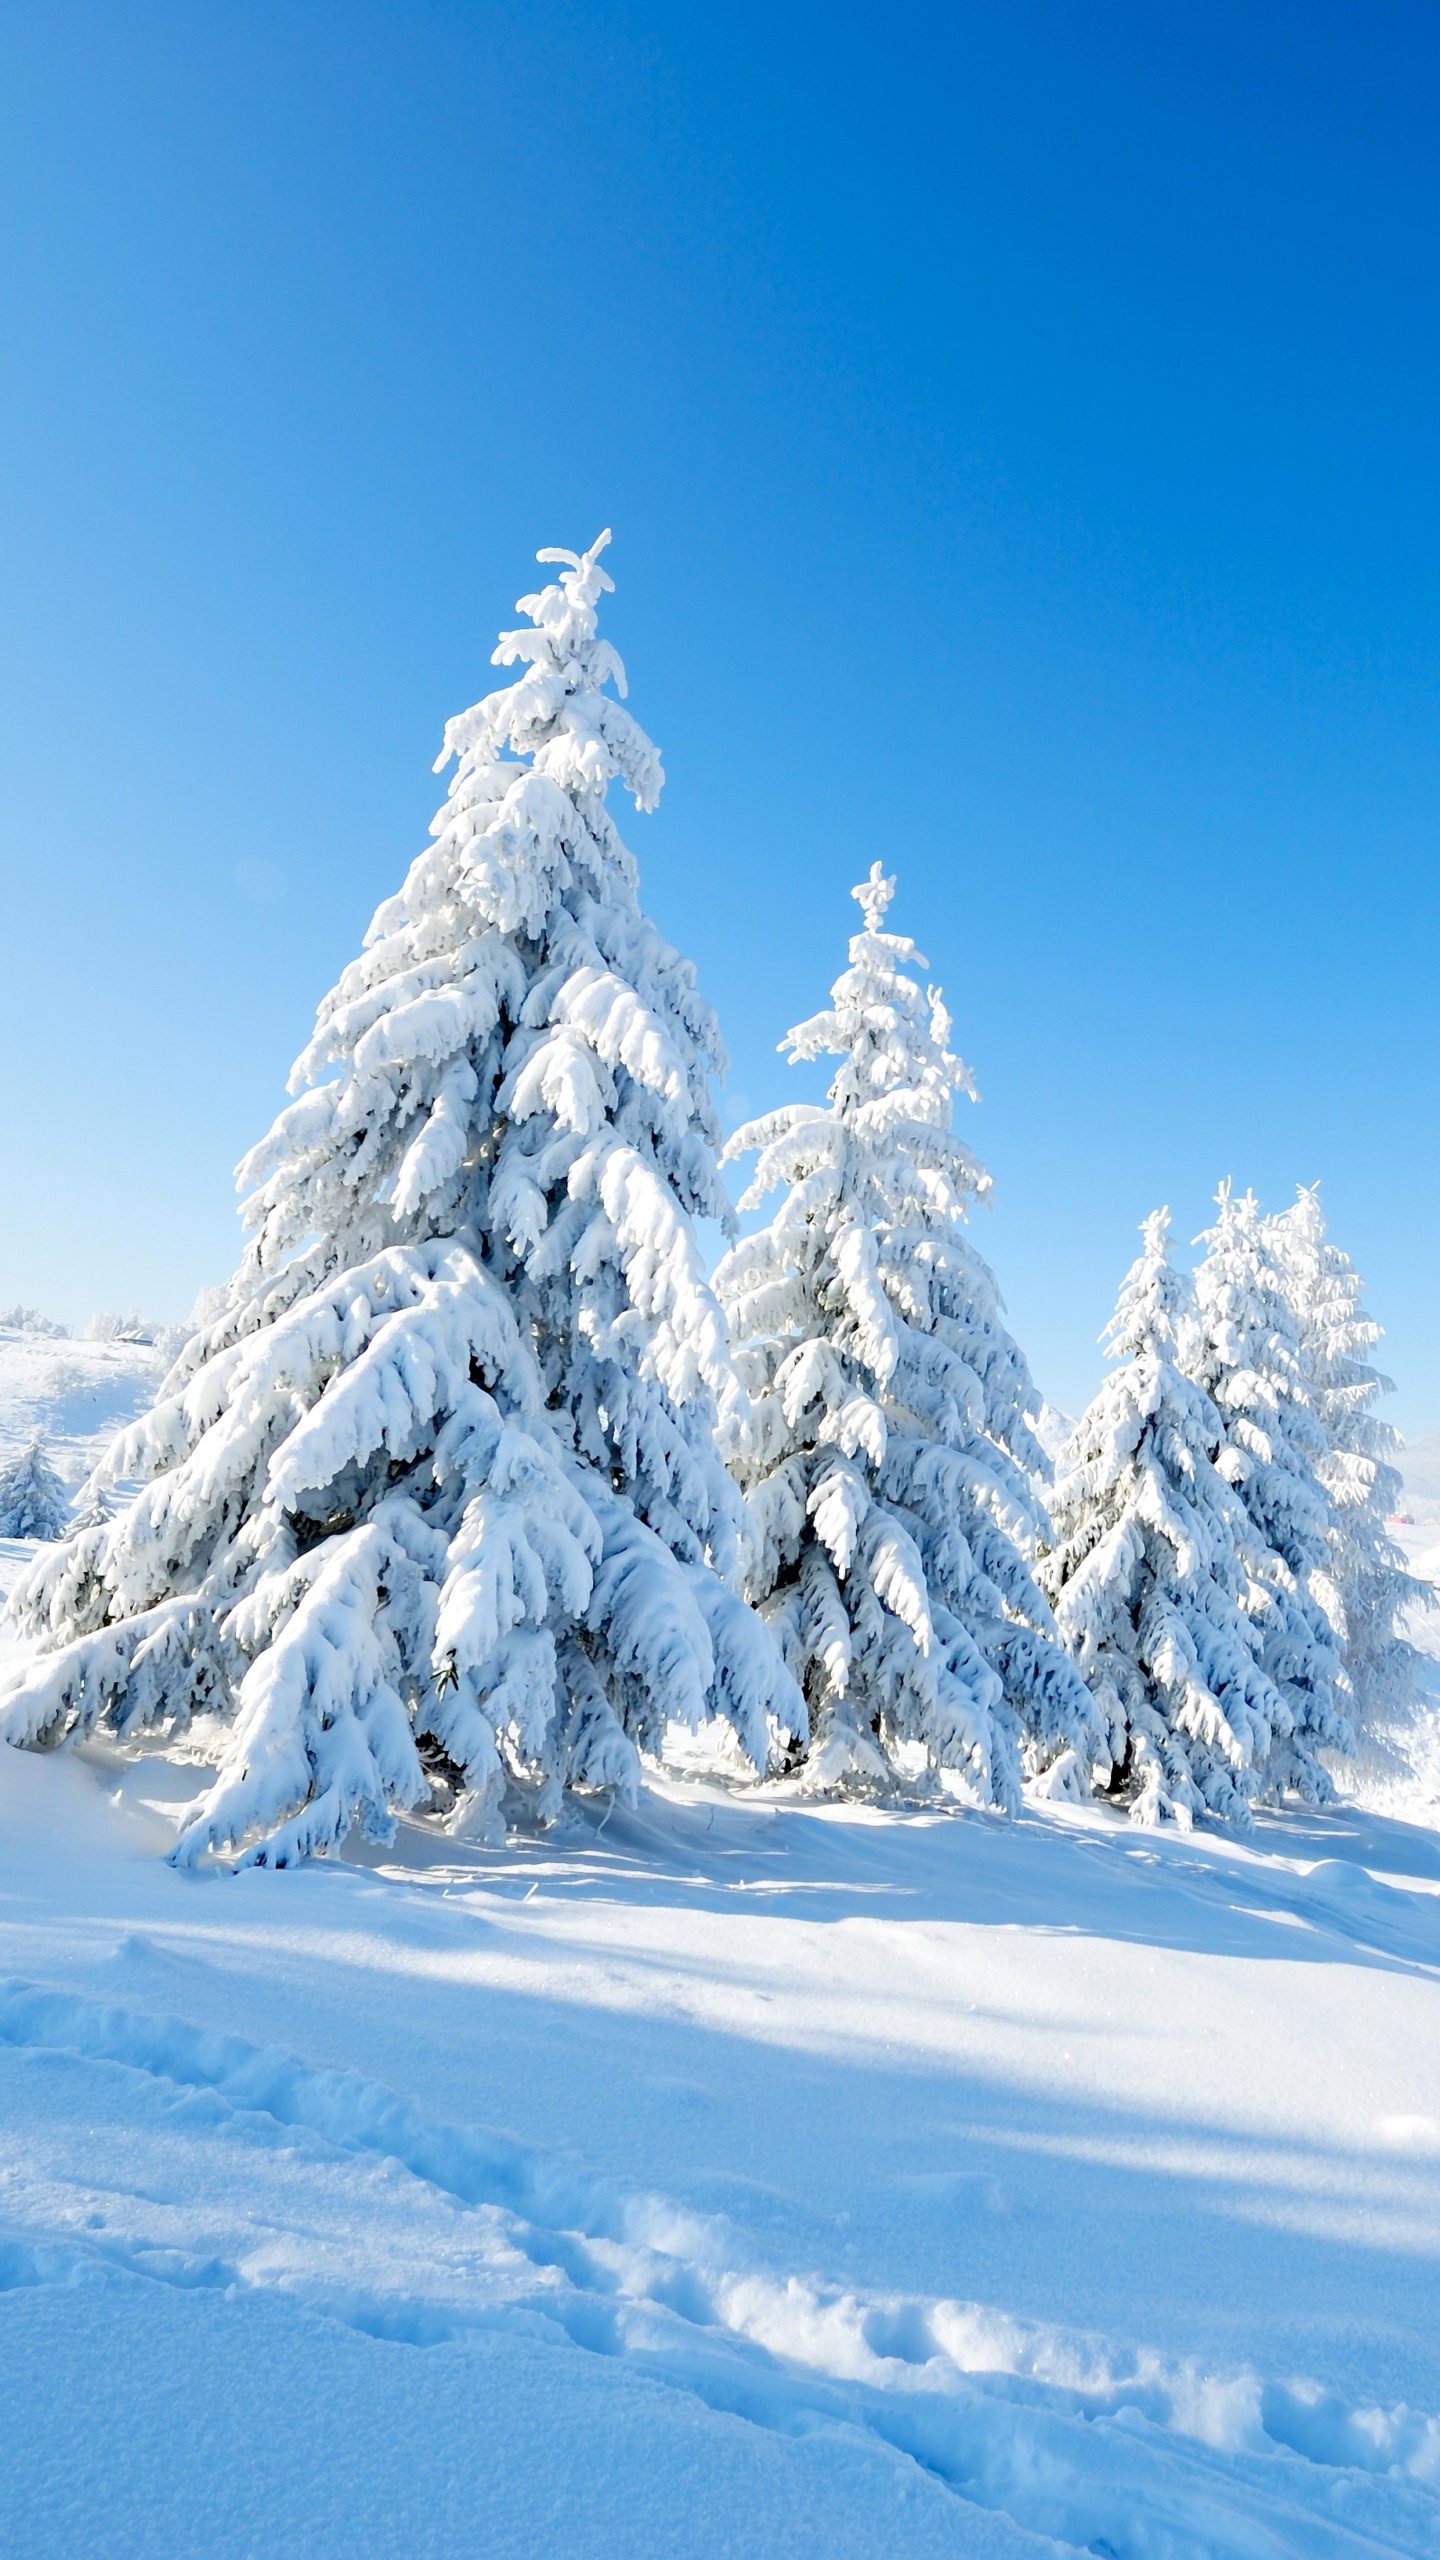 Snow Covered Pine Trees on Snow Covered Ground Under Blue Sky During Daytime. Wallpaper in 1440x2560 Resolution